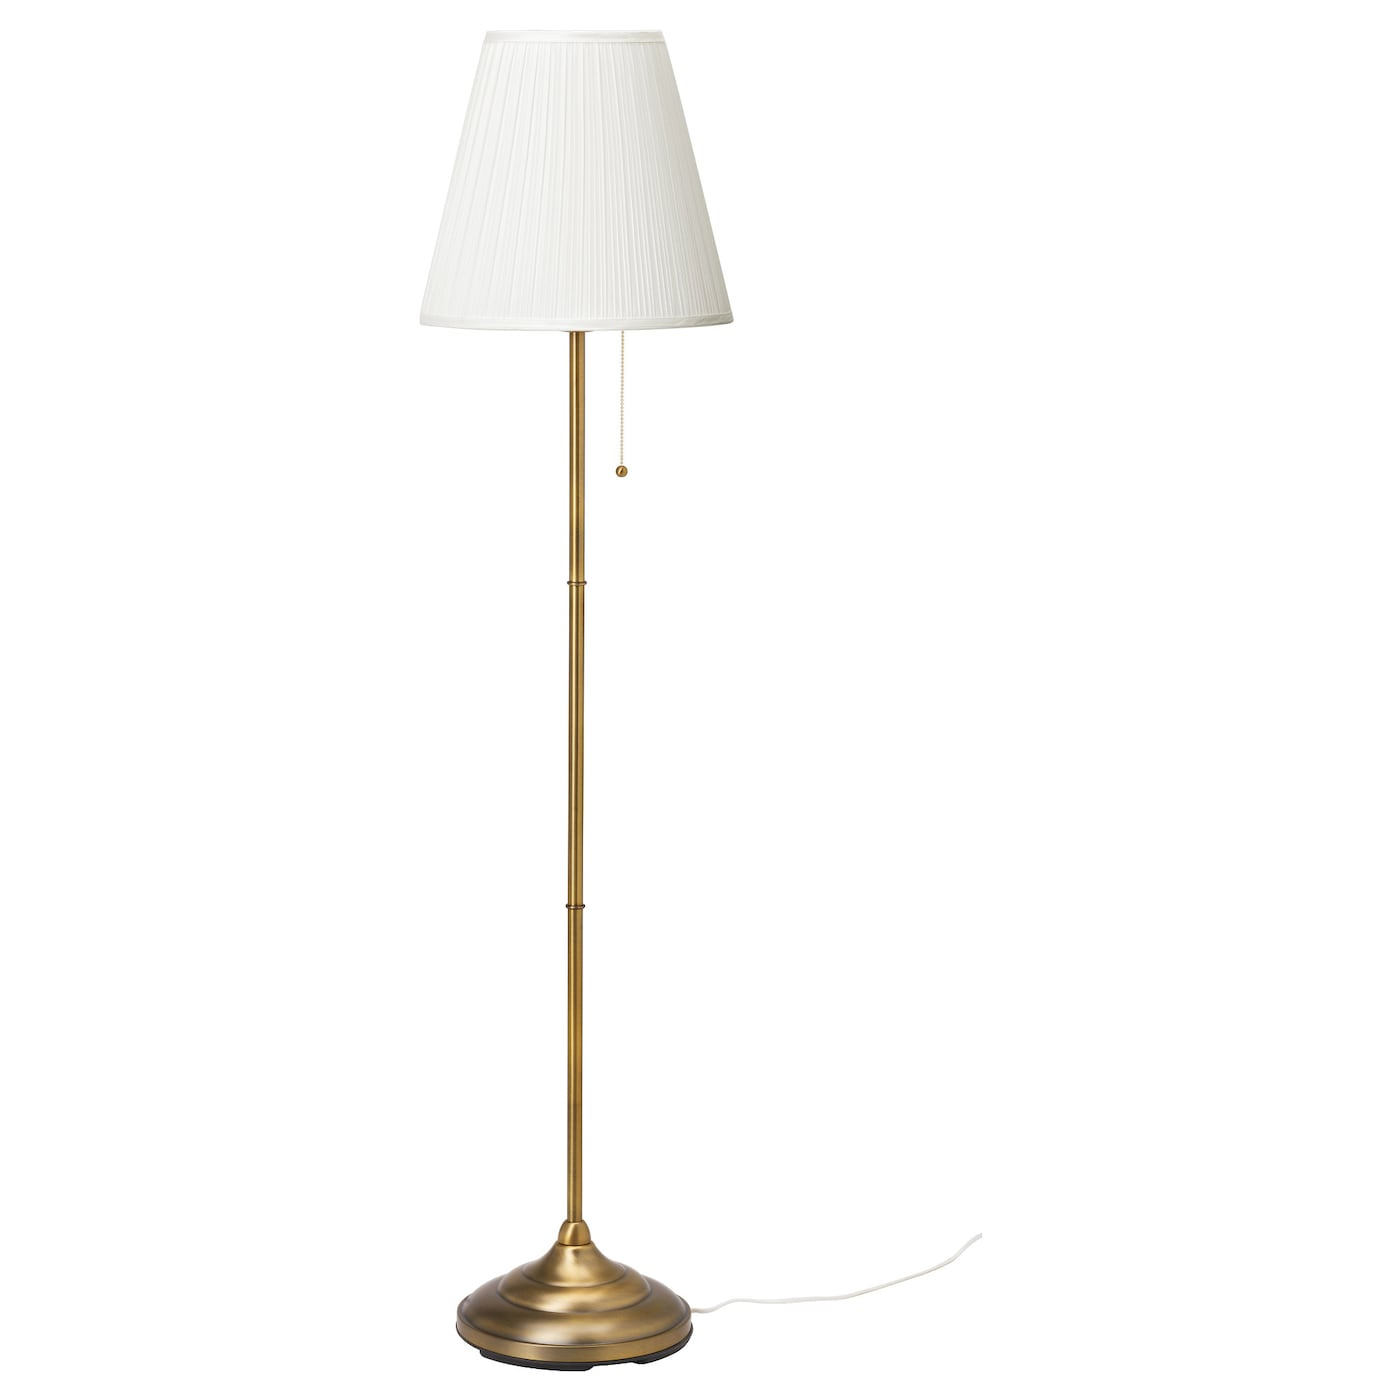 Rstid Floor Lamp Brass White with regard to sizing 1400 X 1400